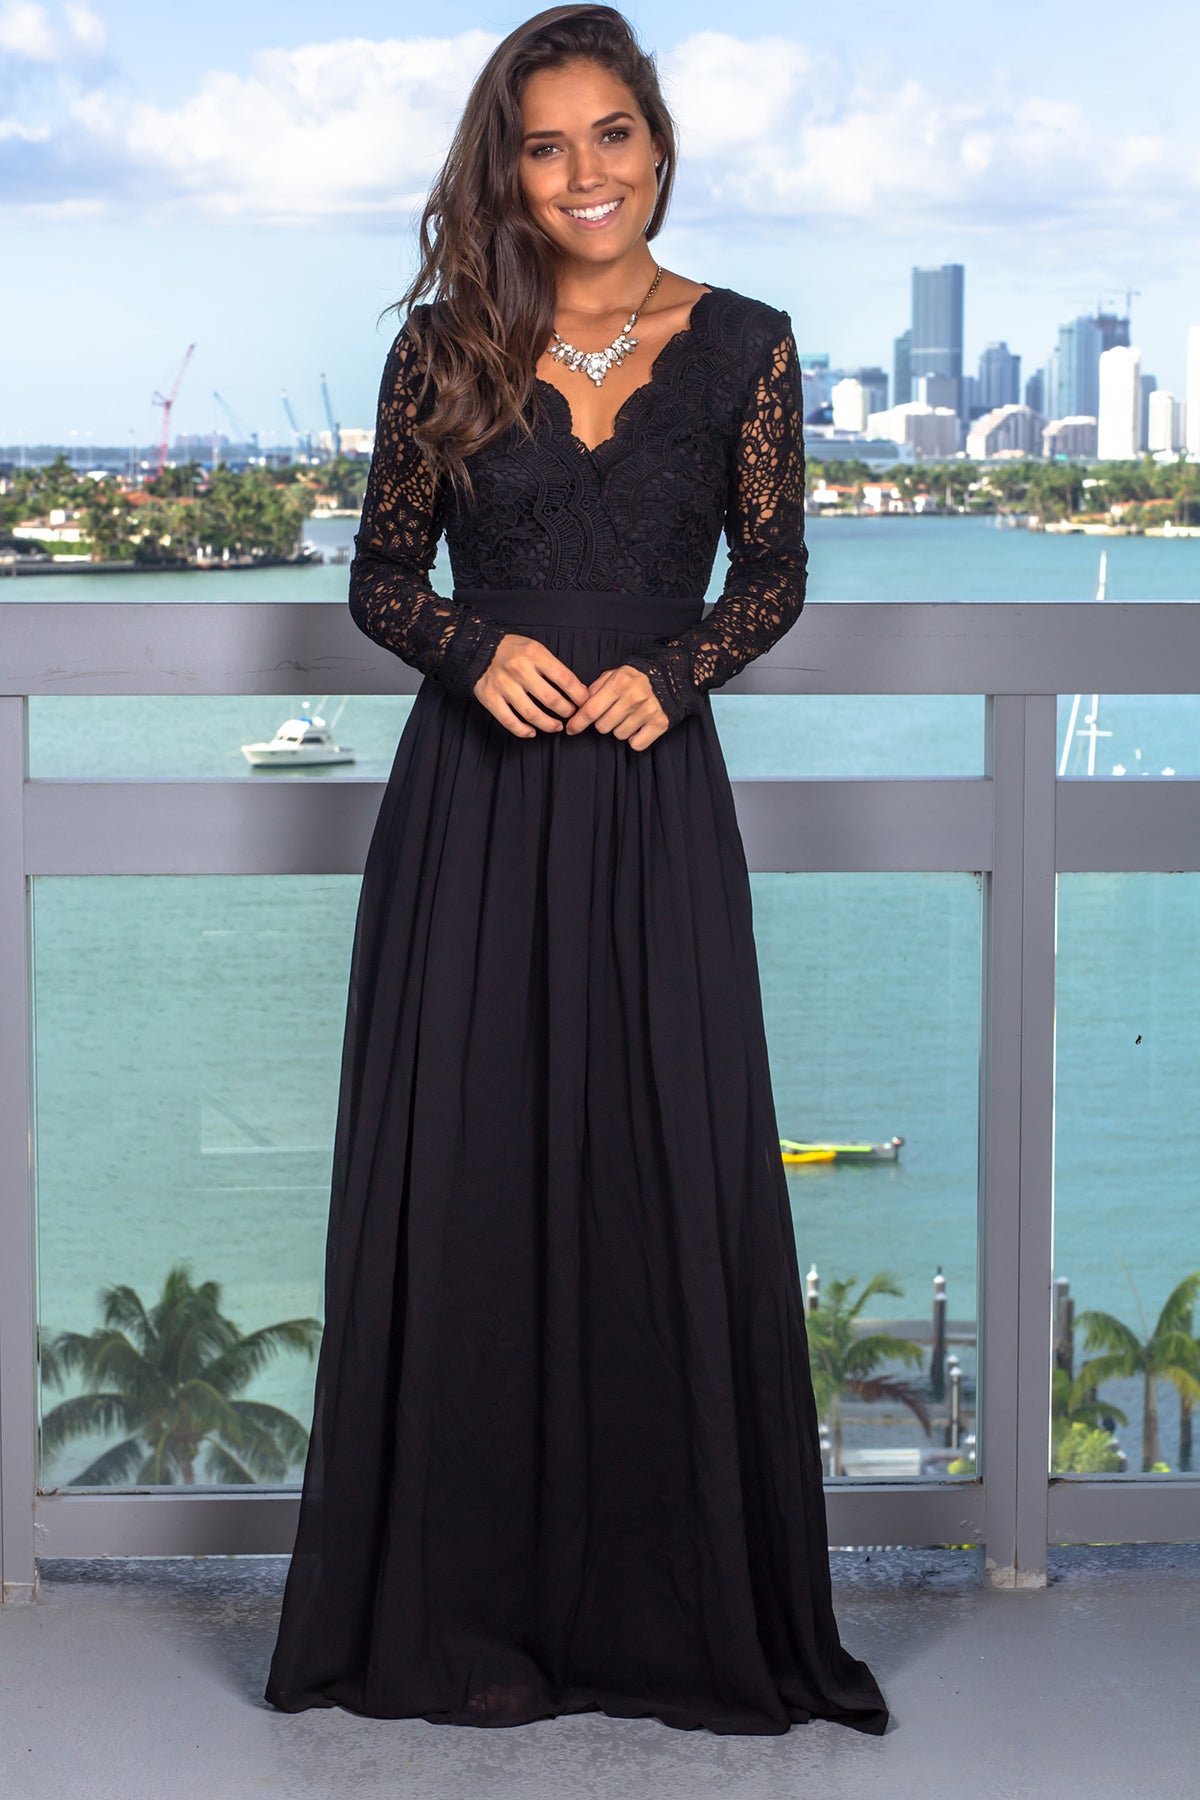 Black Crochet Maxi Dress with Open Back and Long Sleeves | Maxi Dresses ...